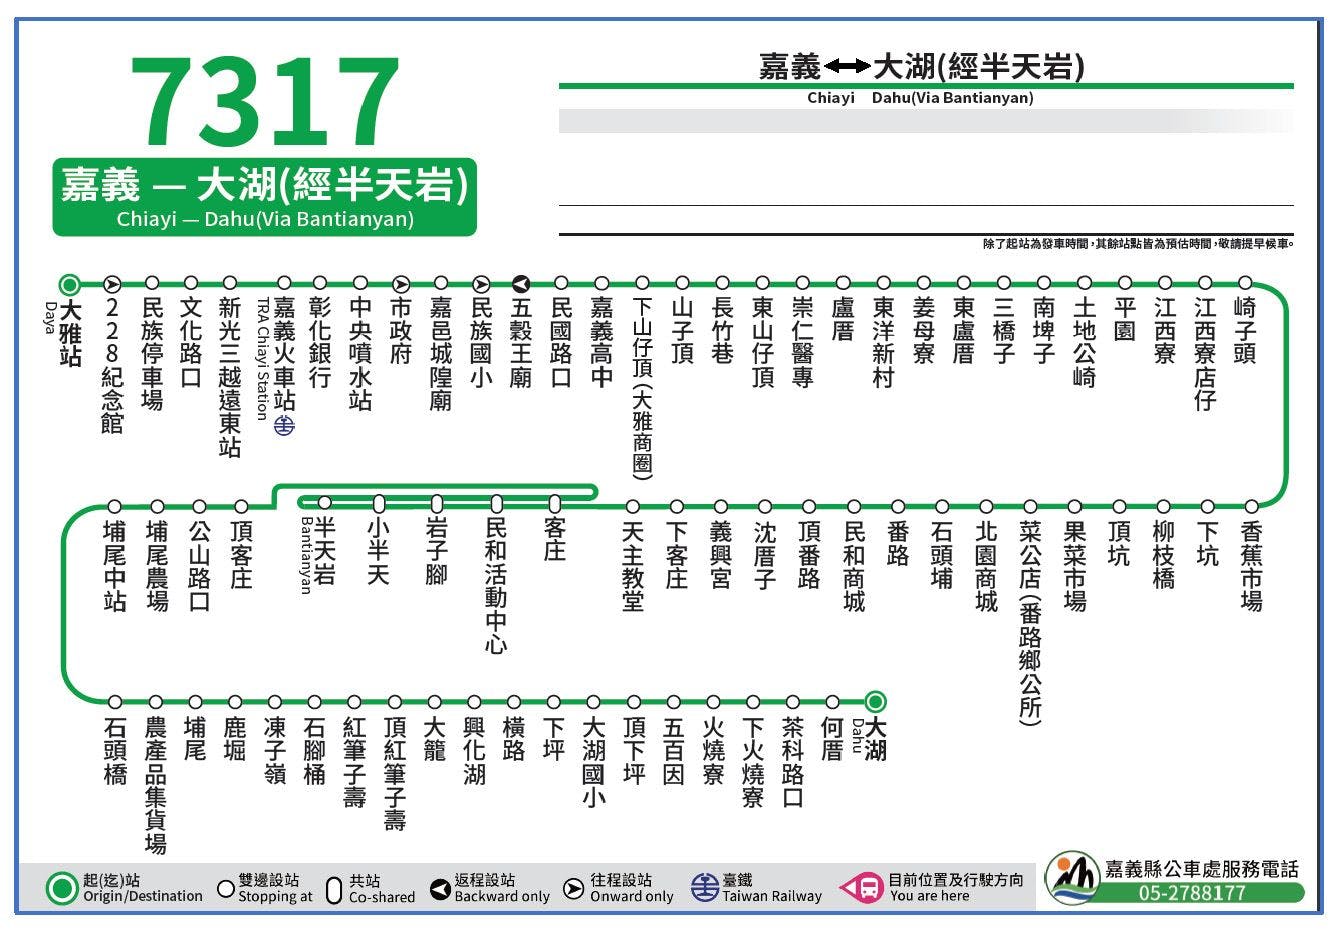 7317Route Map-Chiayi County Bus Service Administration